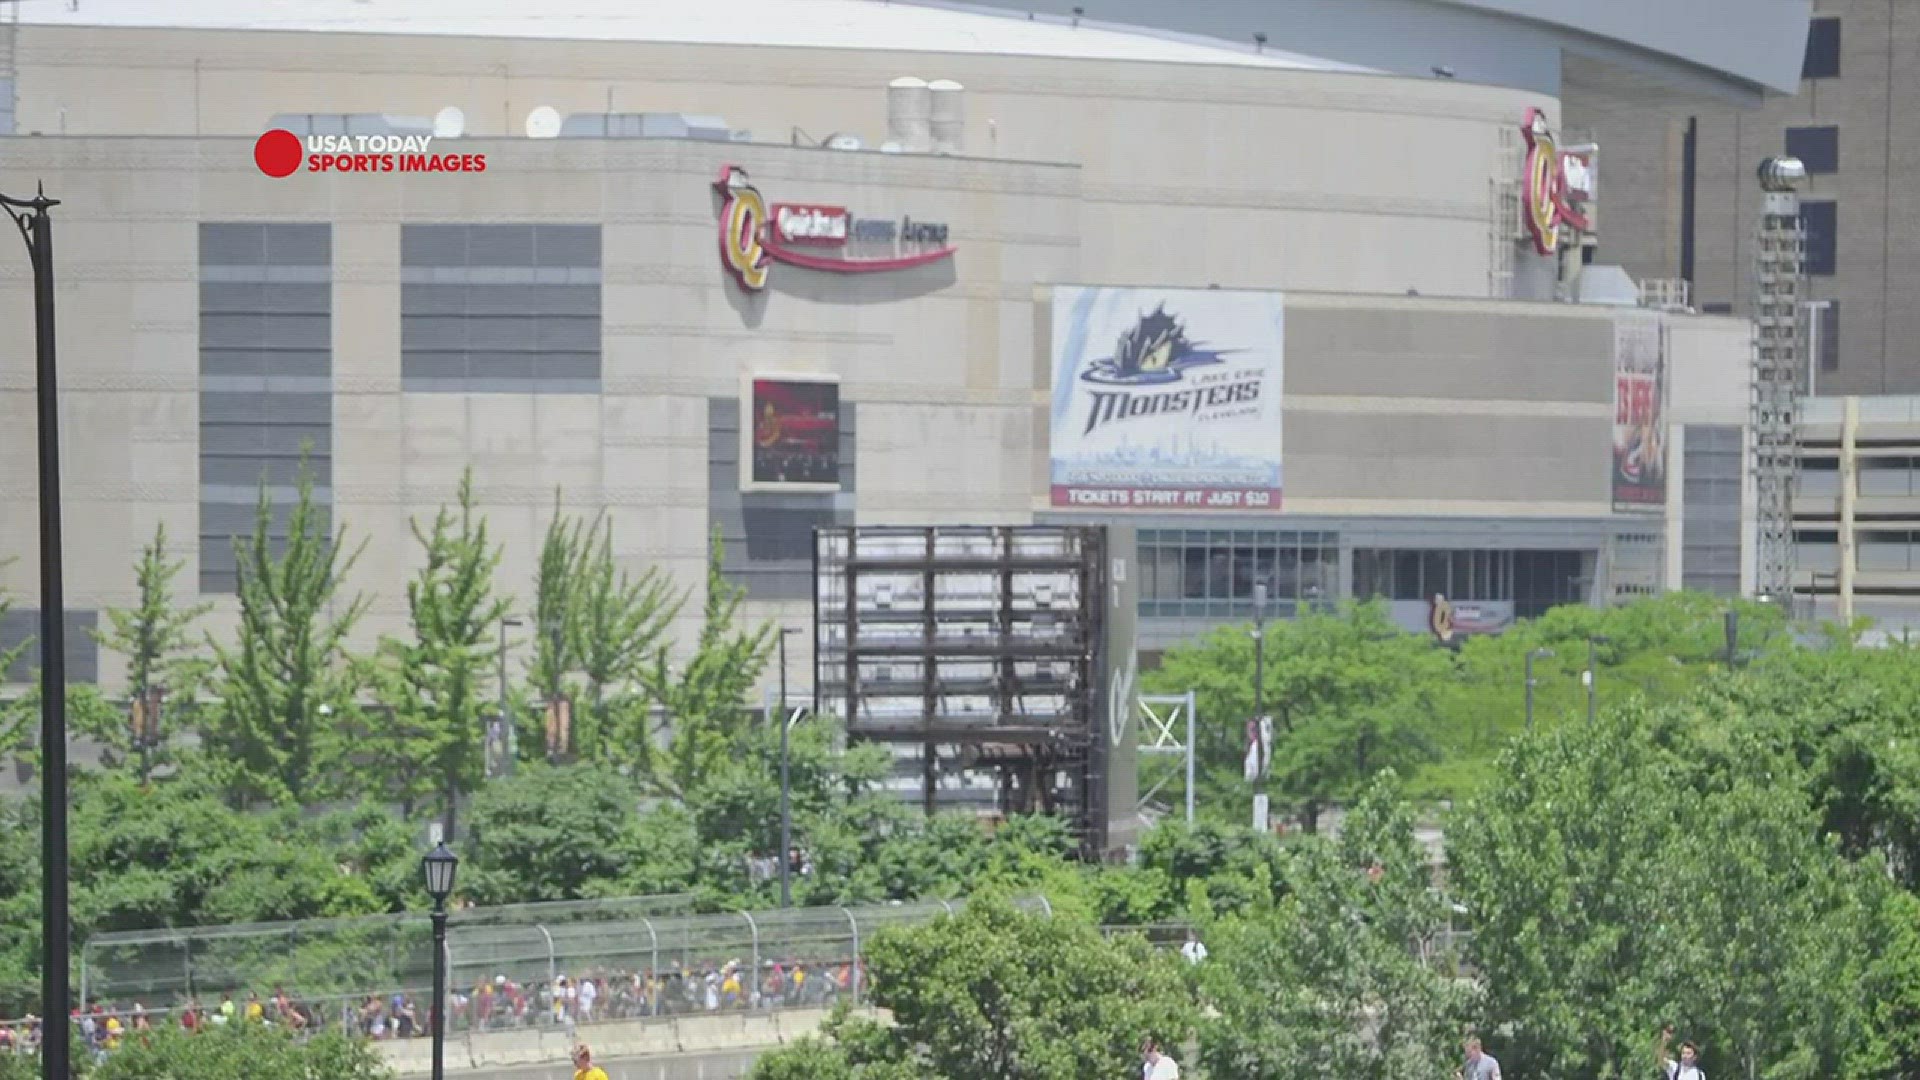 Cleveland lawyer Fred Nance discusses the cancellation of the Quicken Loans Arena renovation deal.